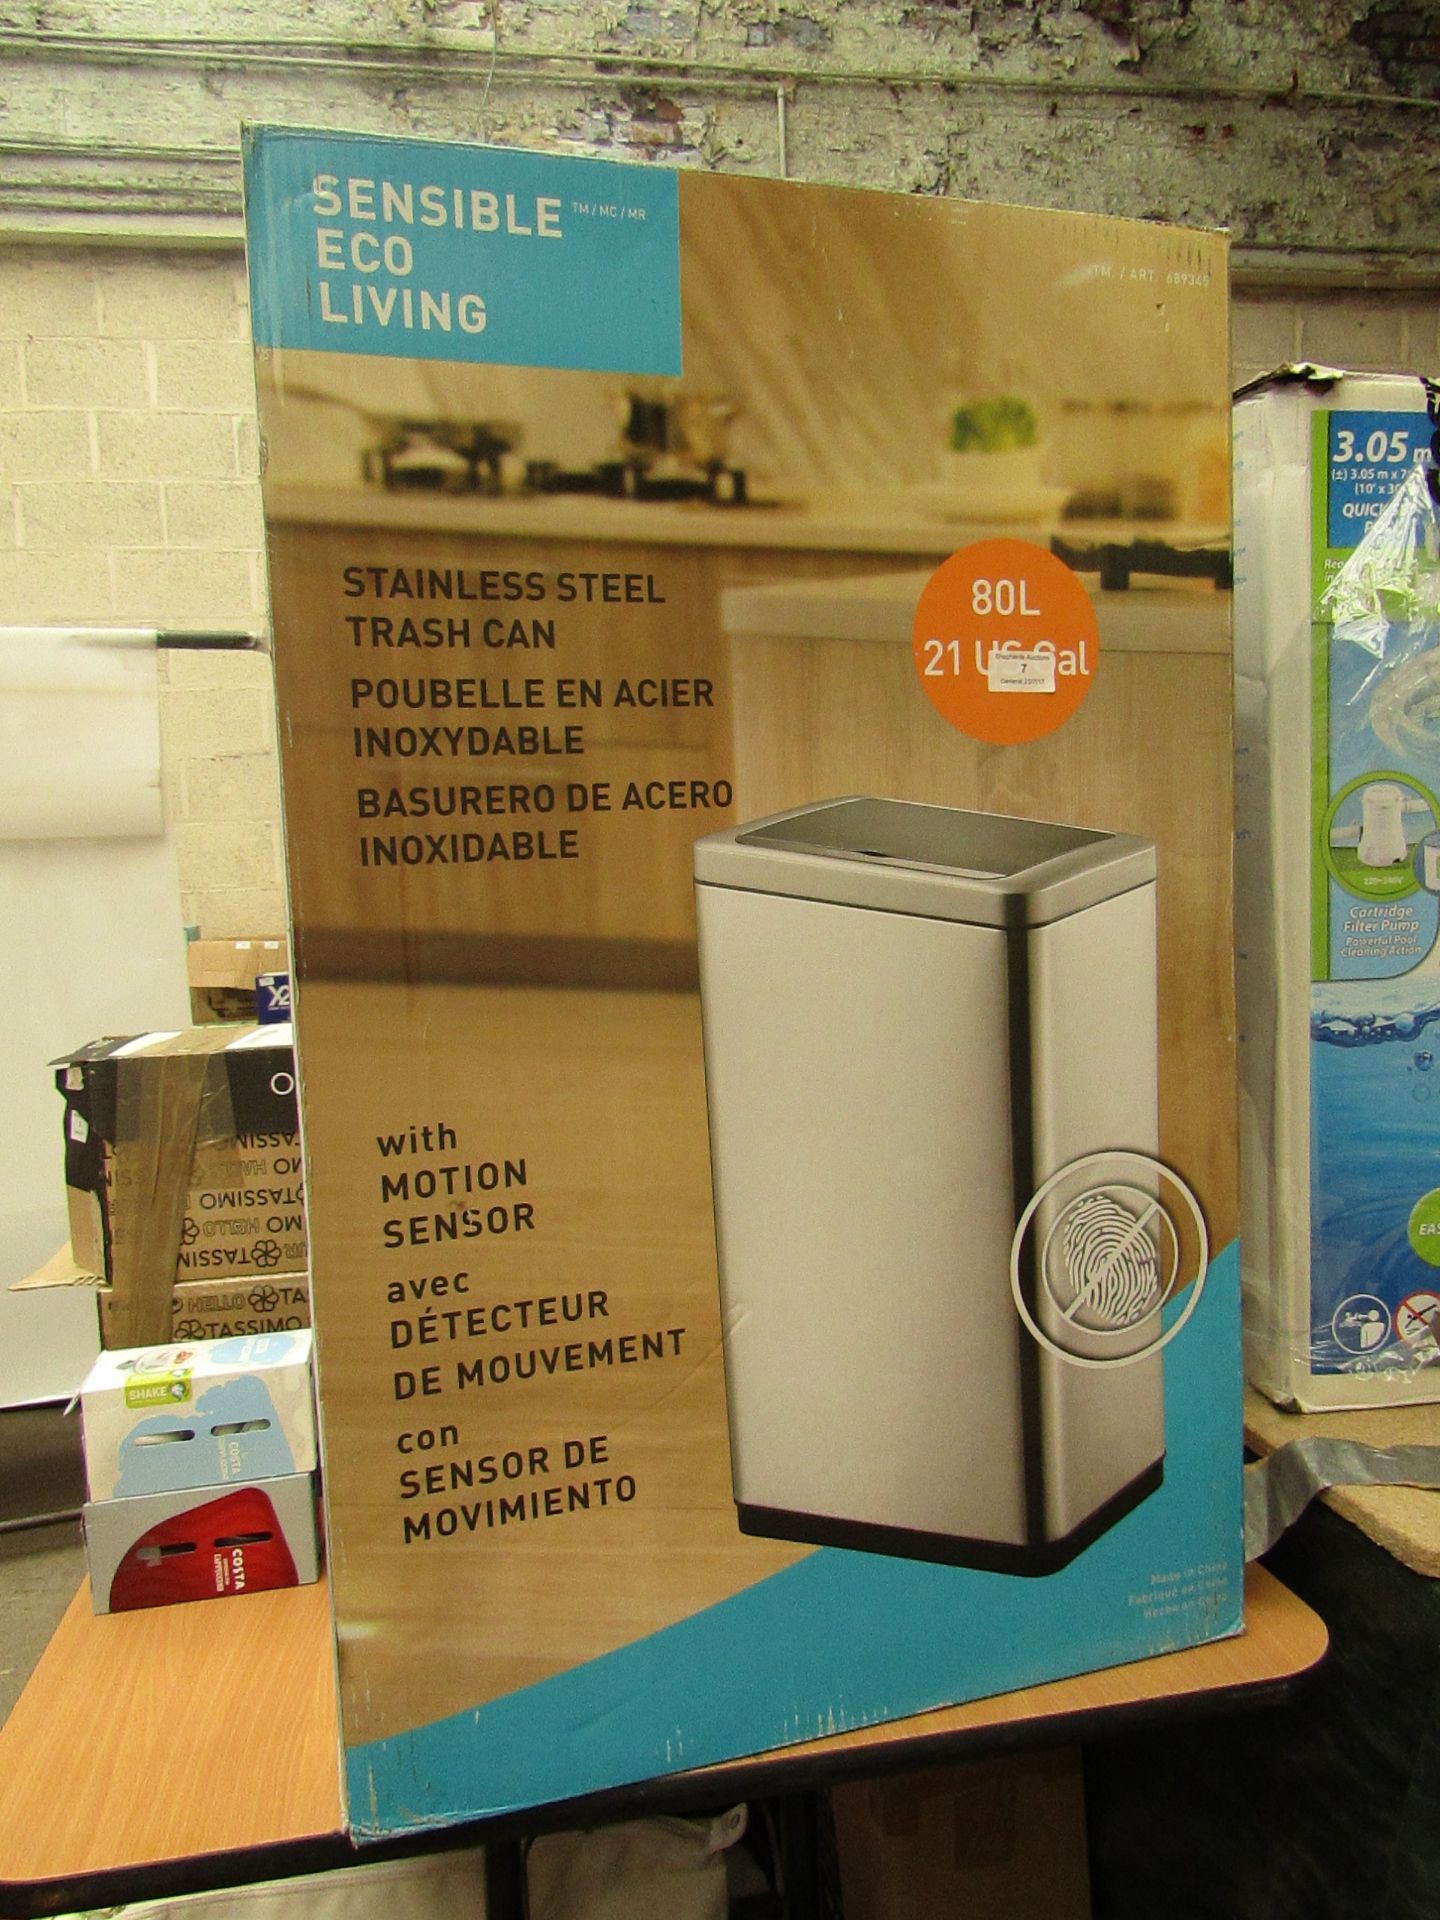 Sensible Eco Living stainless steel trash can with motion sensor, unchecked and boxed.